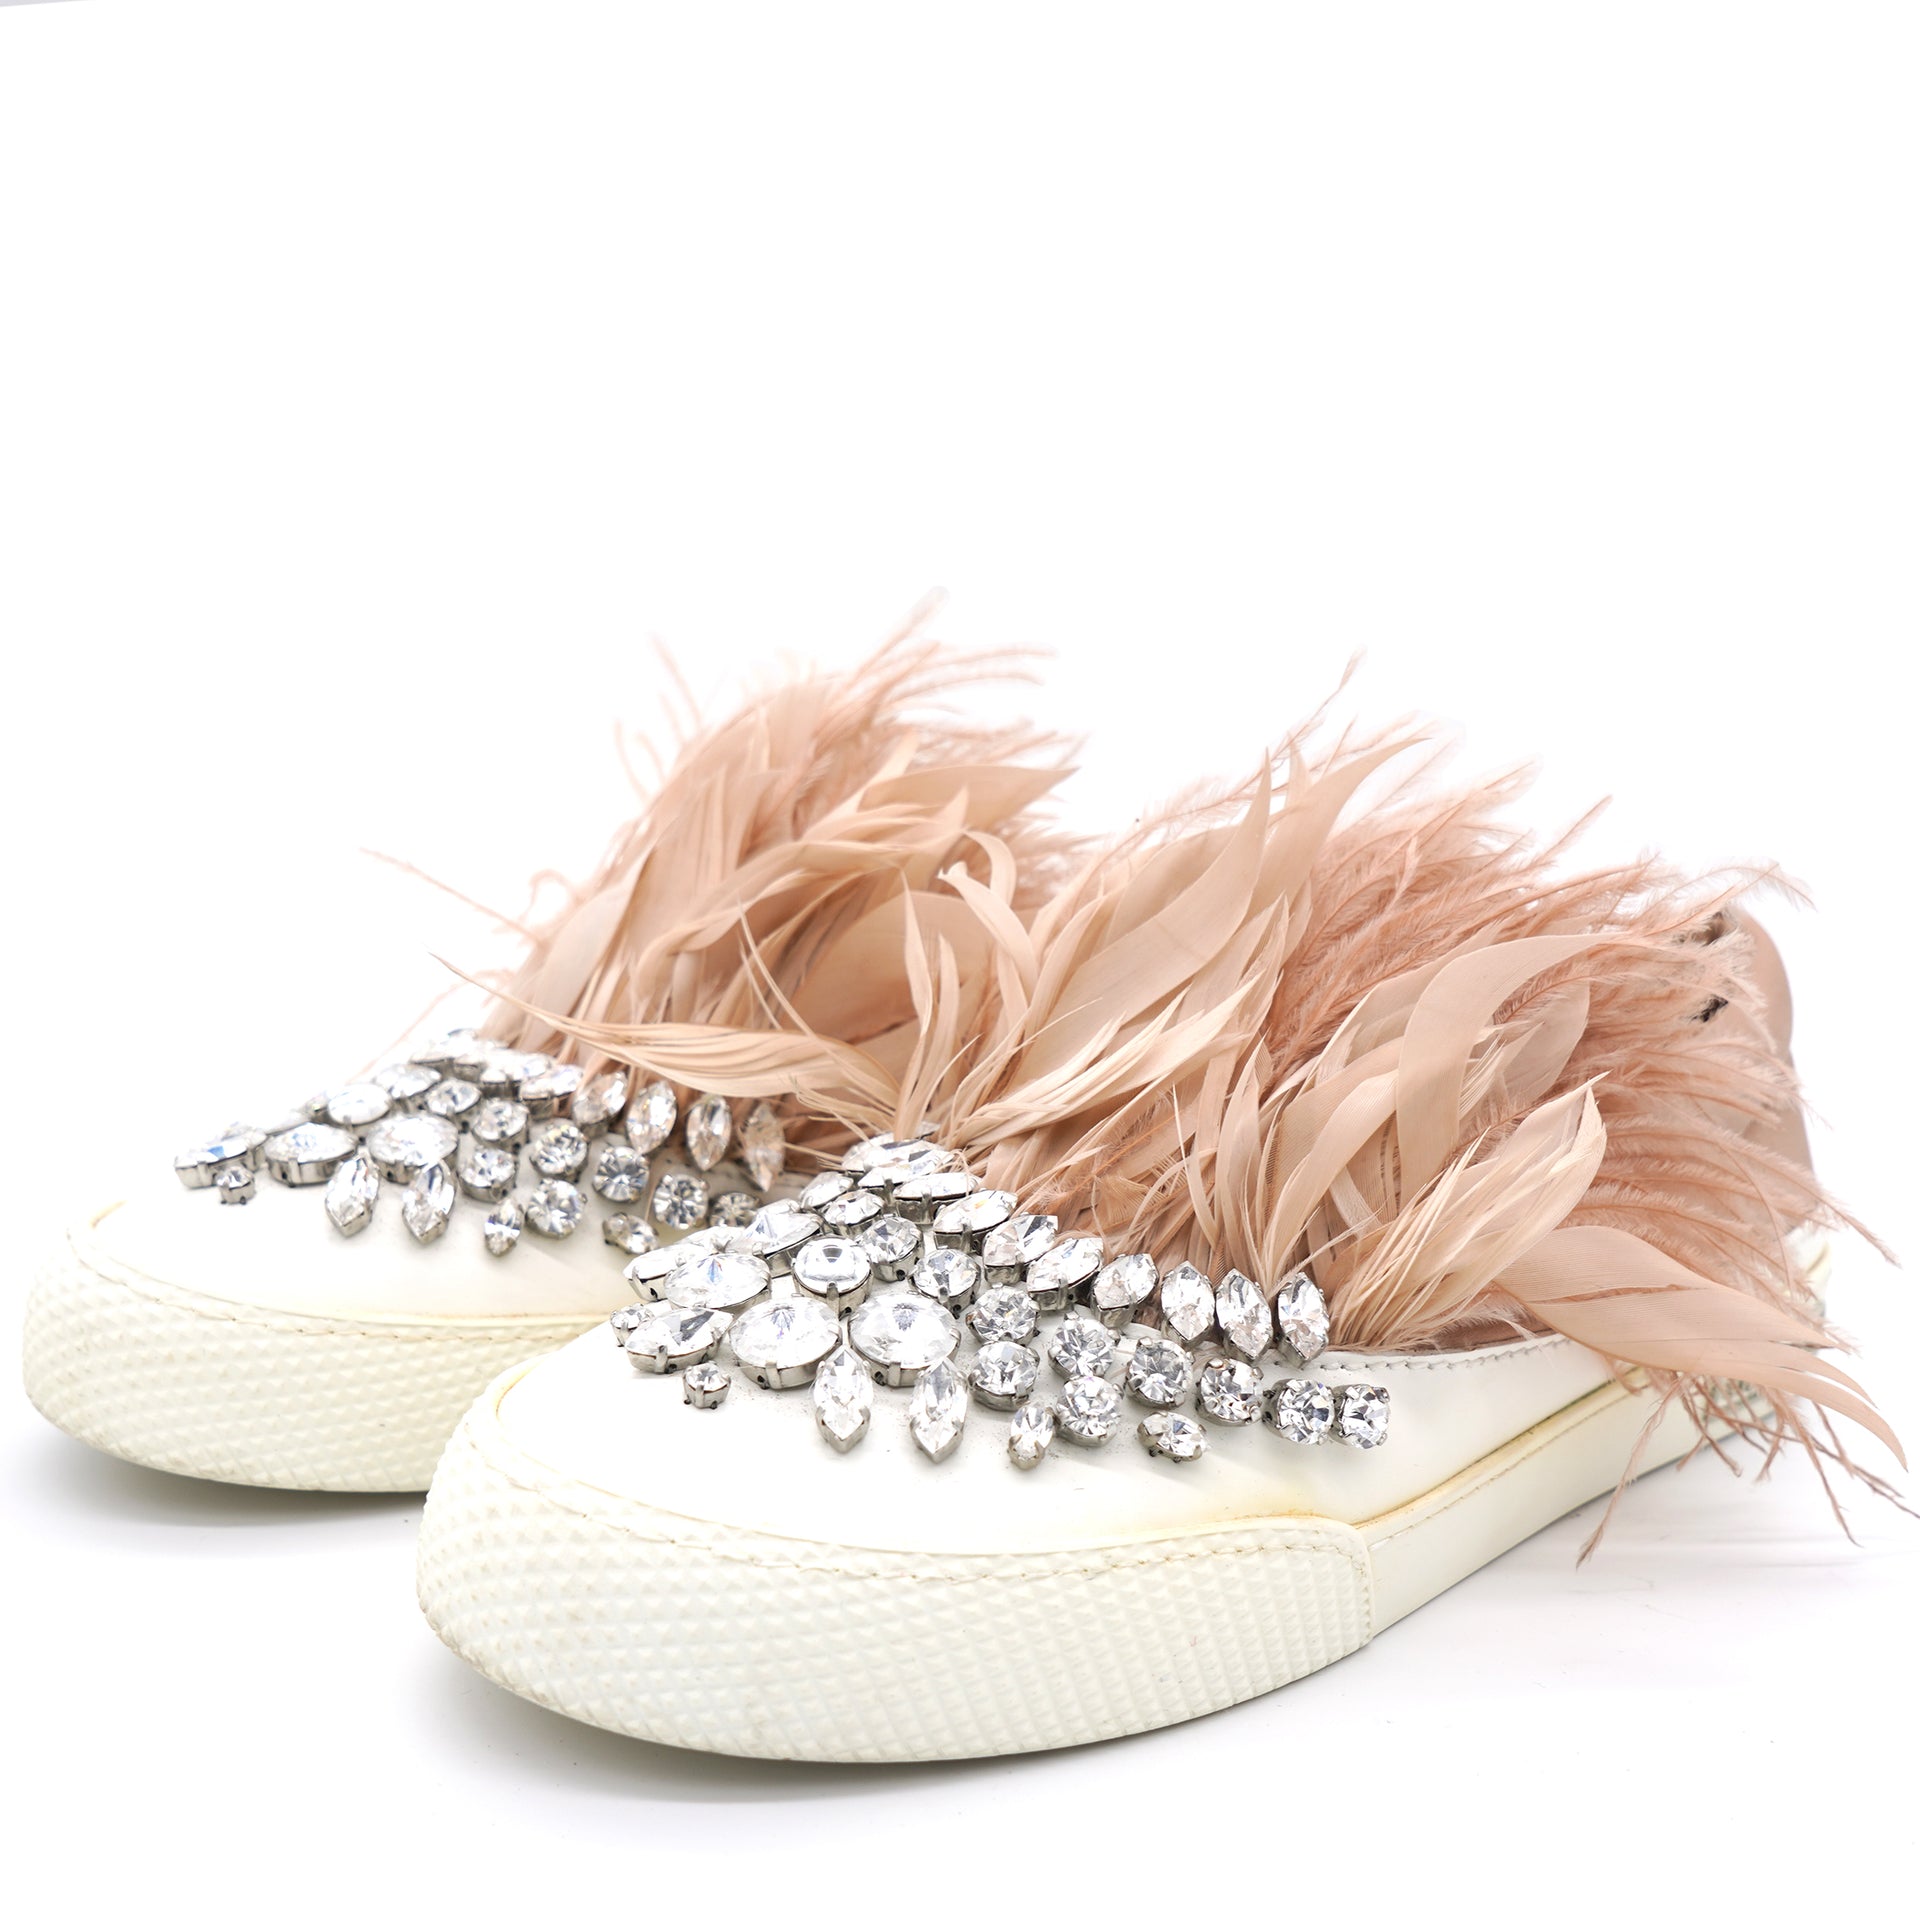 Pink Crystal Embellished Satin With Marabou Feathers Slip On Sneakers 37.5